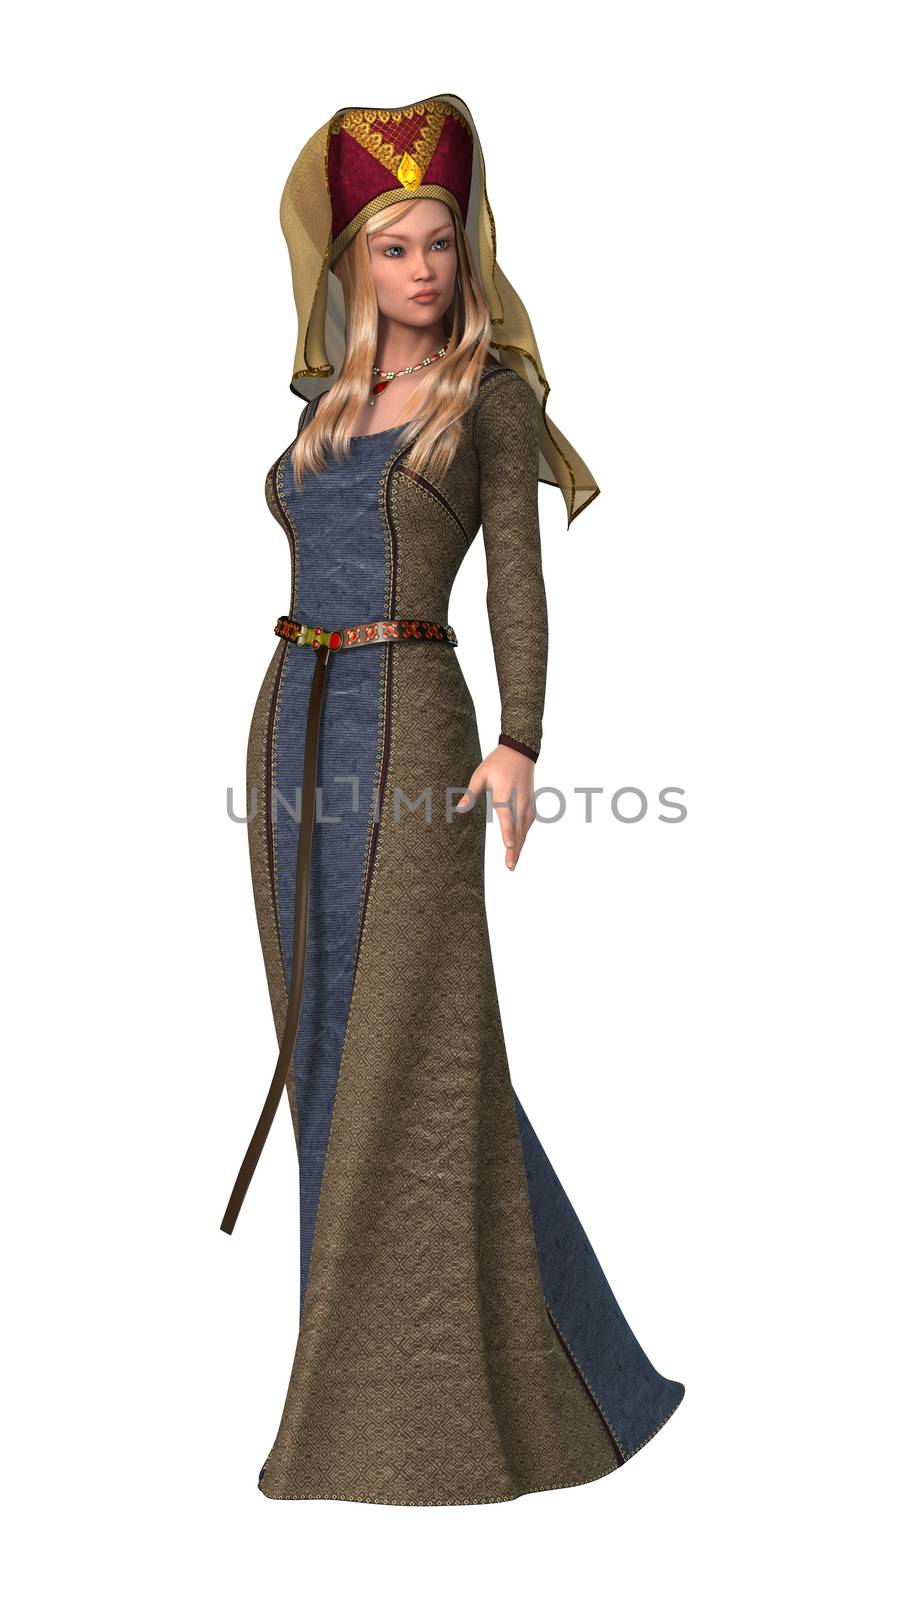 3D digital render of a beautiful blond medieval lady isolated on white background